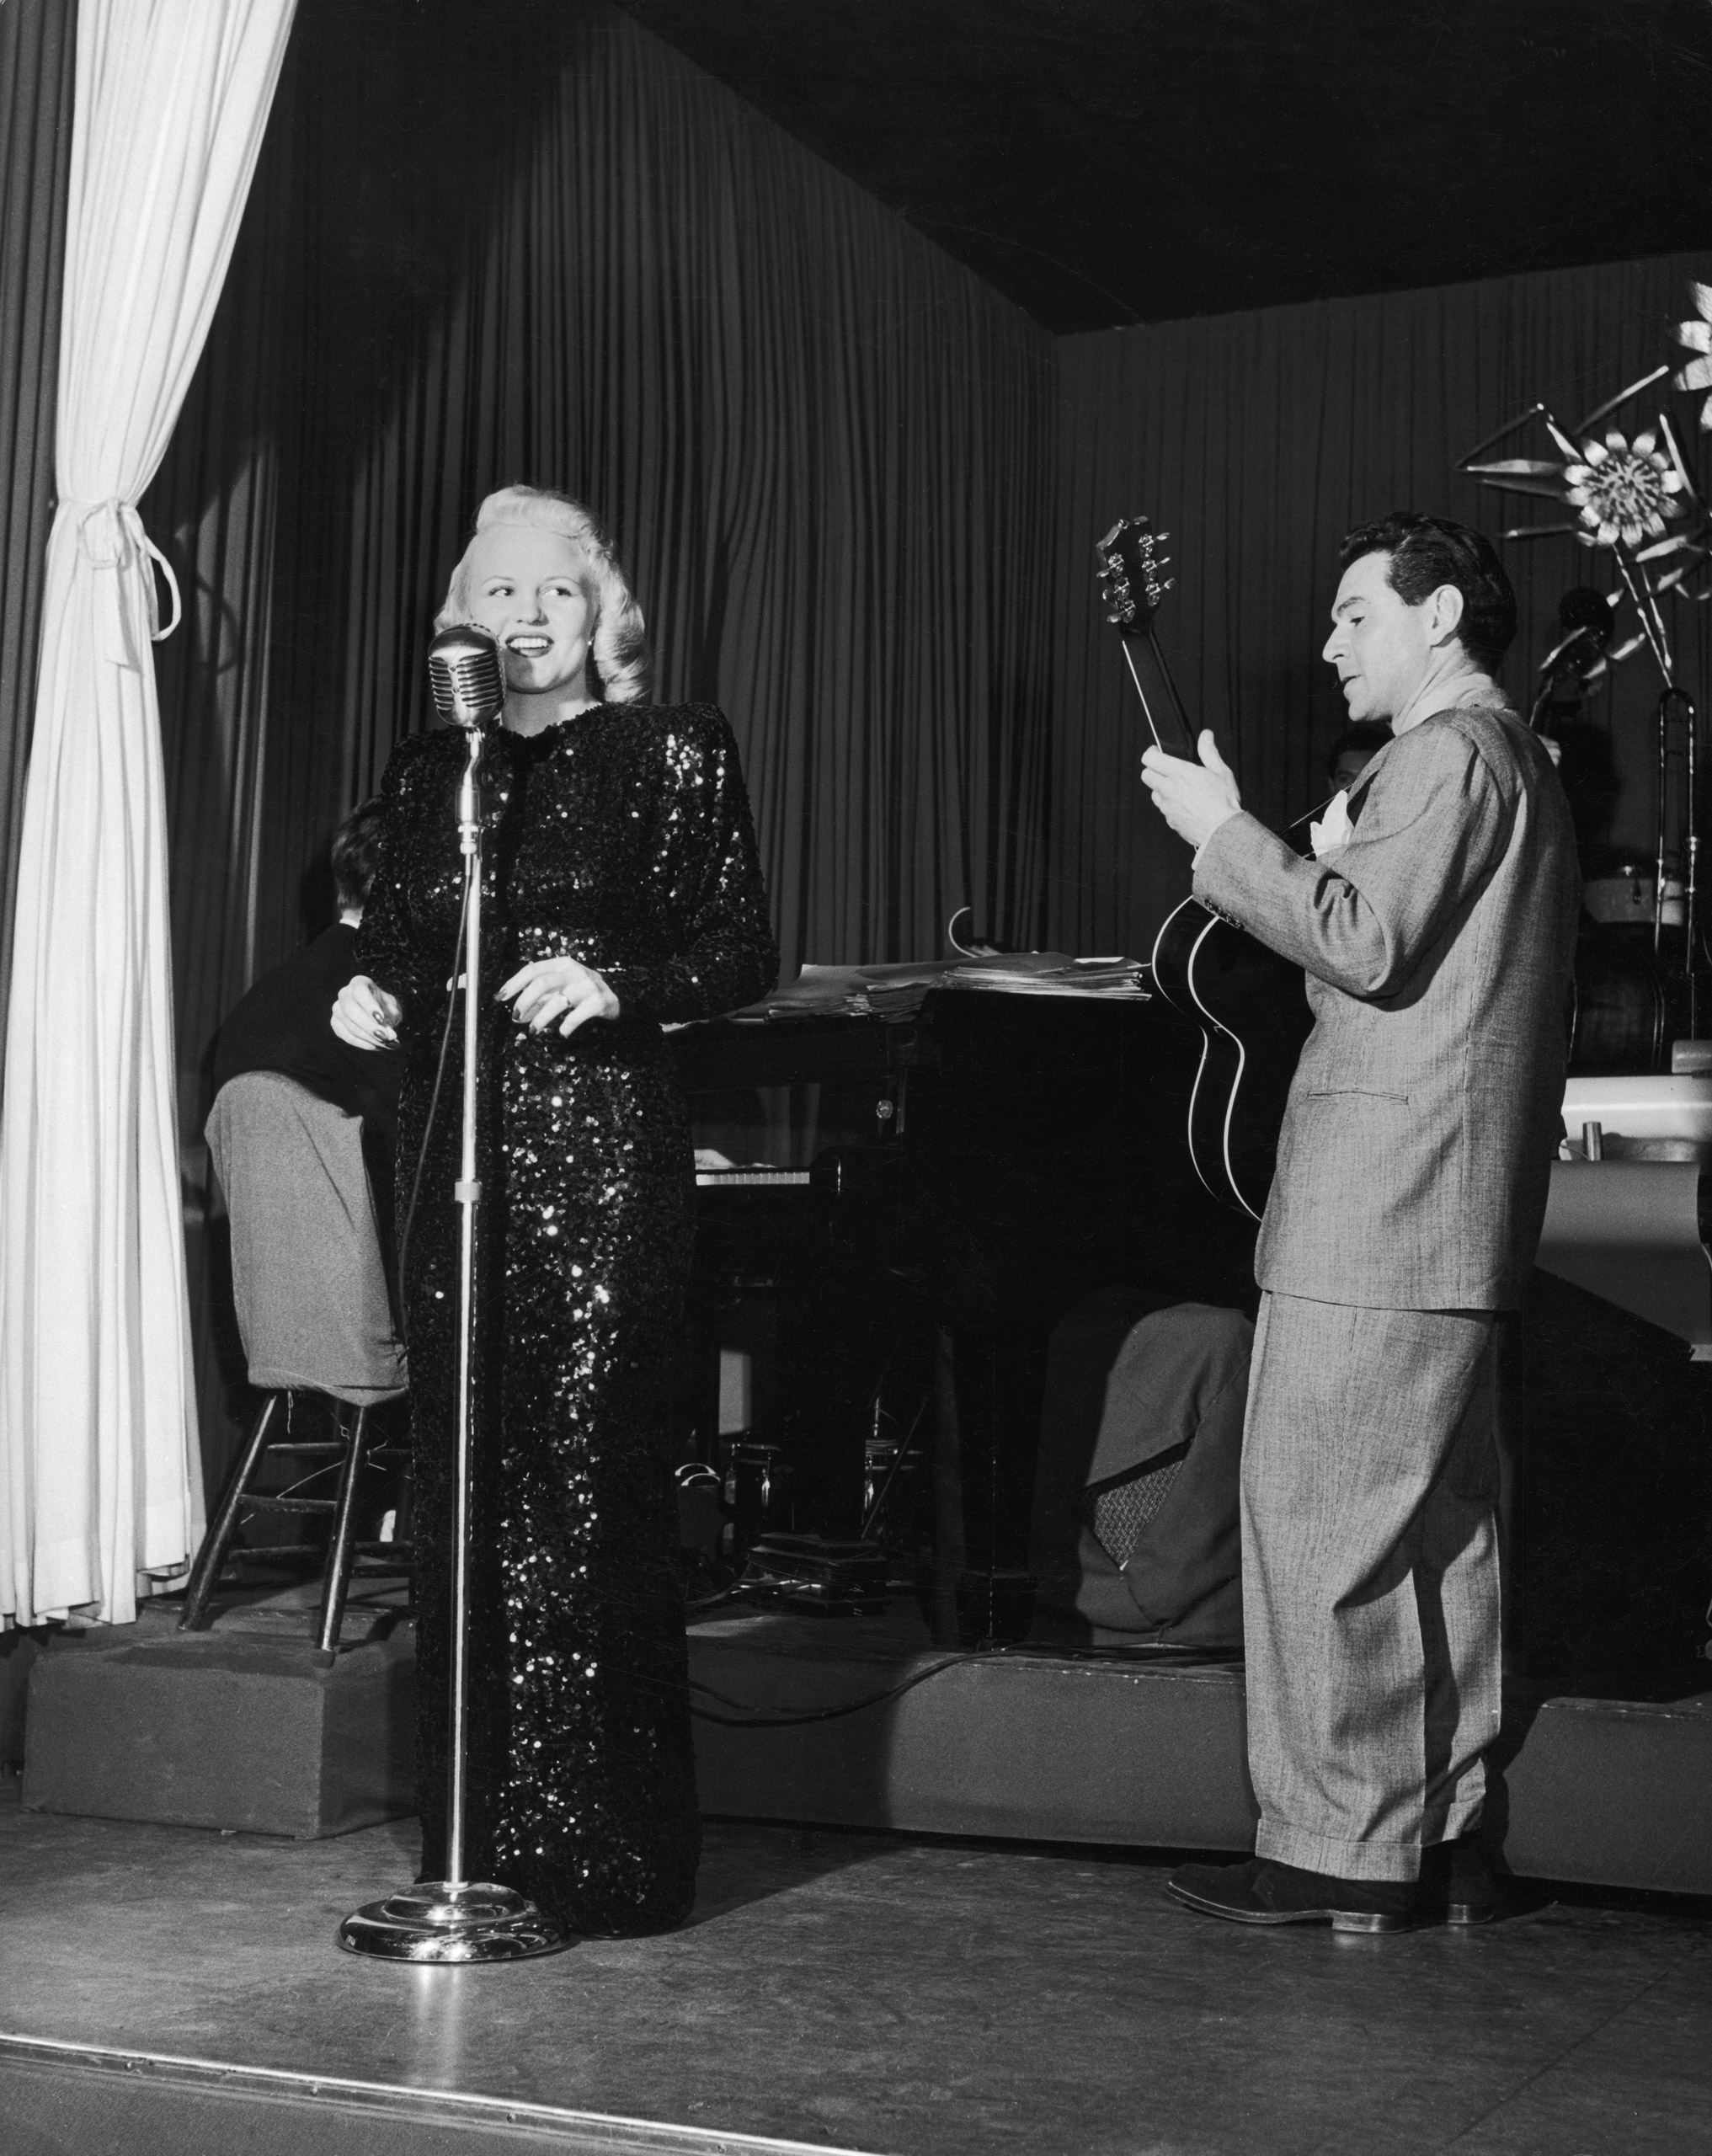 Peggy Lee: LIFE Photos of the Rising Star in the 1940s | Time